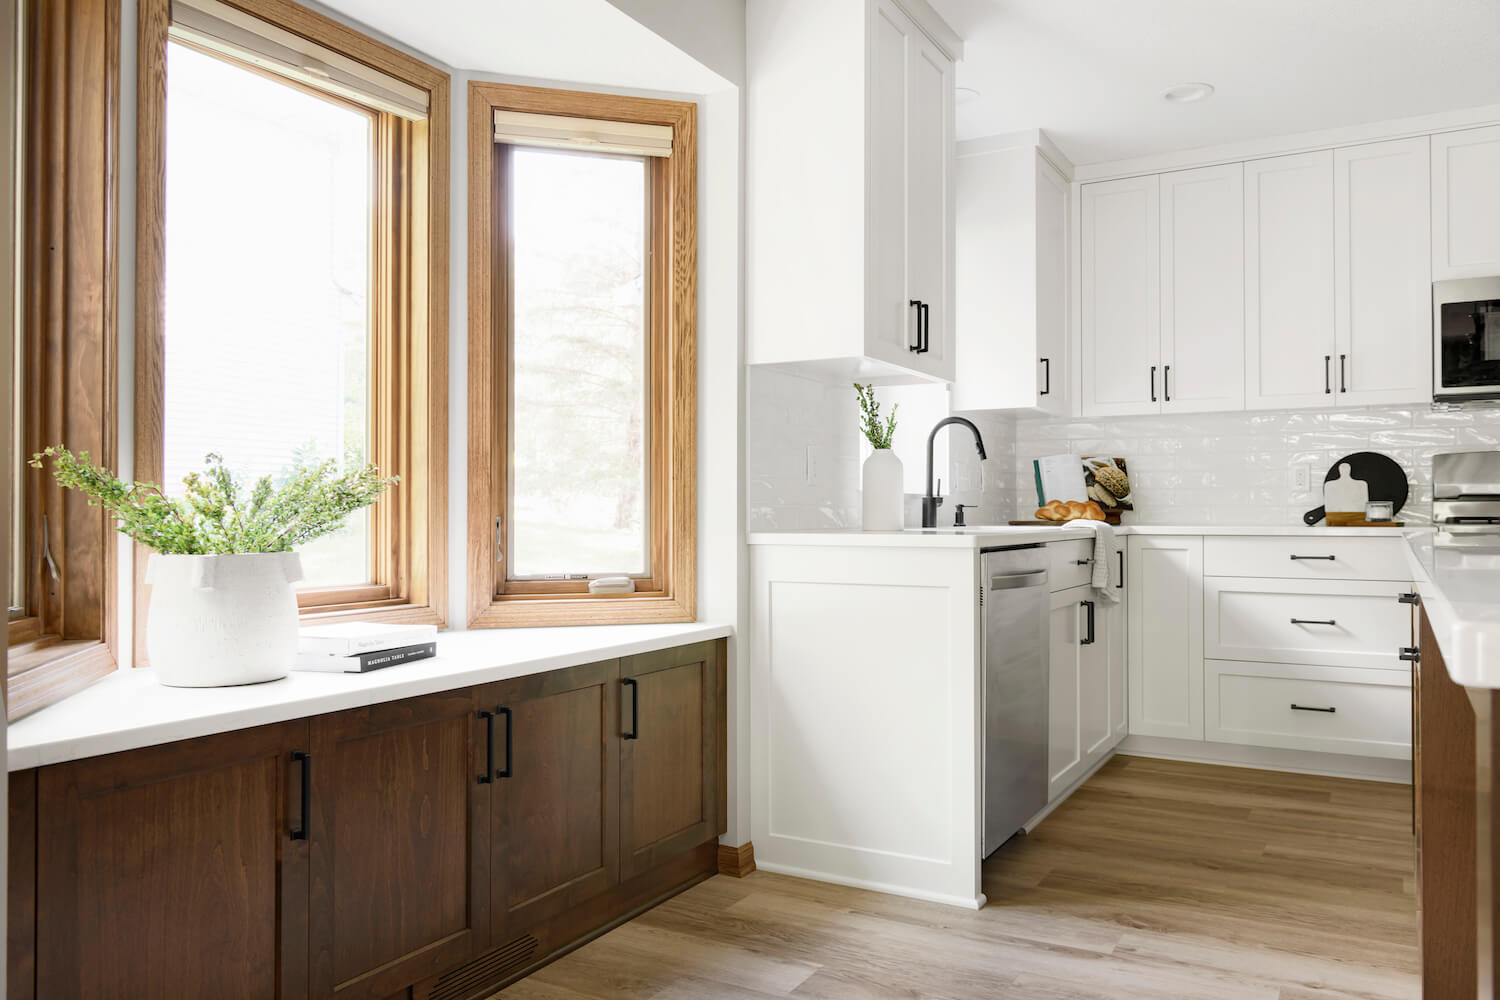 A bay window lets light into a mostly white kitchen